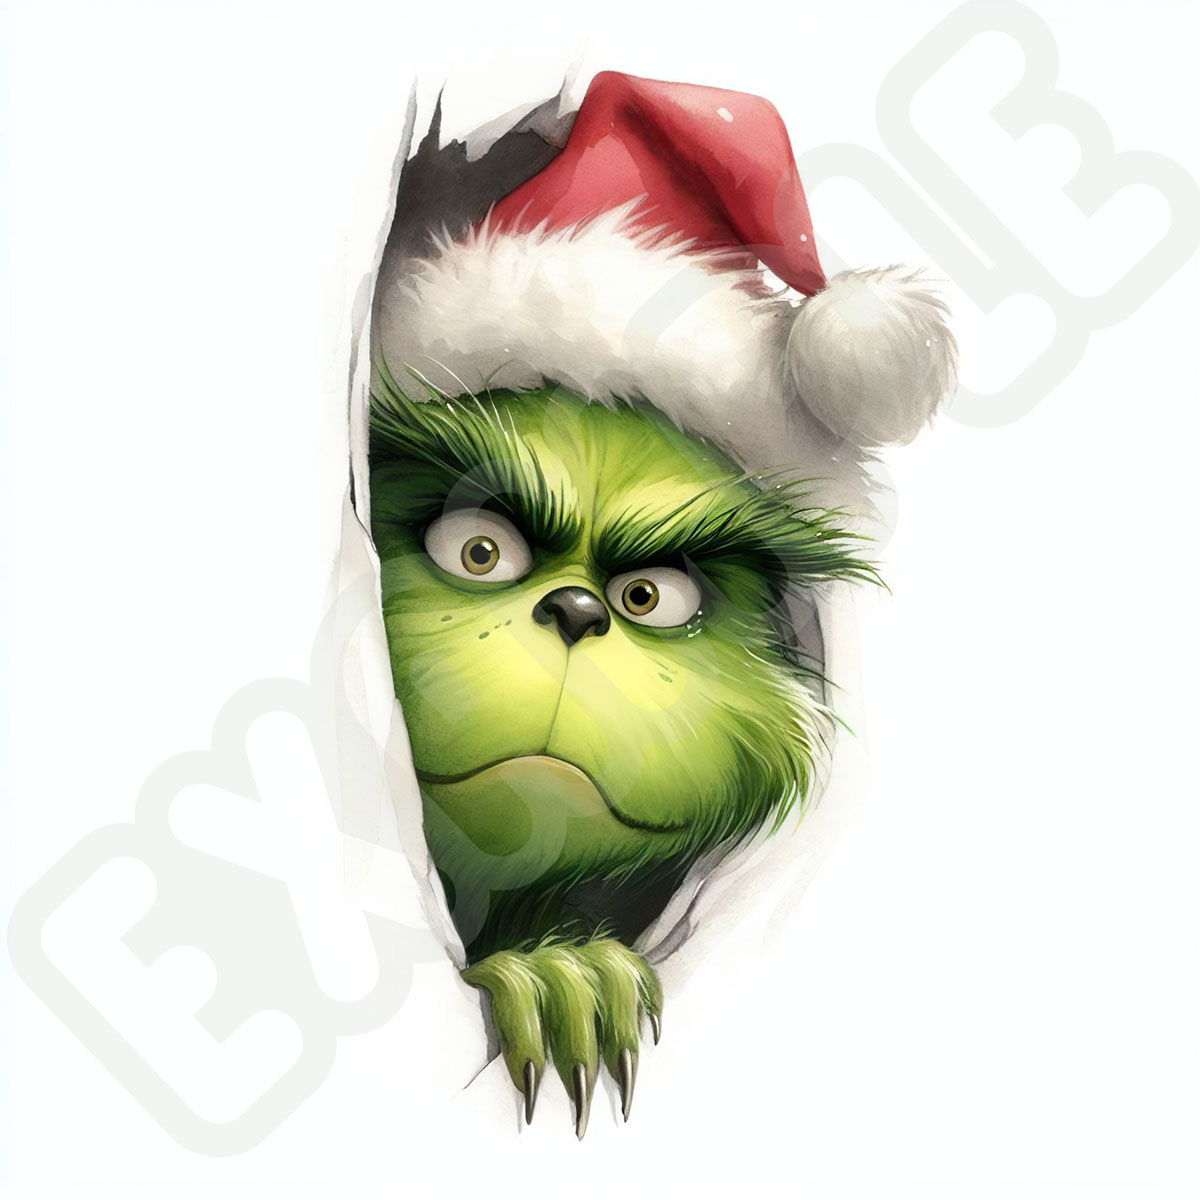 Peeking Grinch Popping Out the Wall rendition image